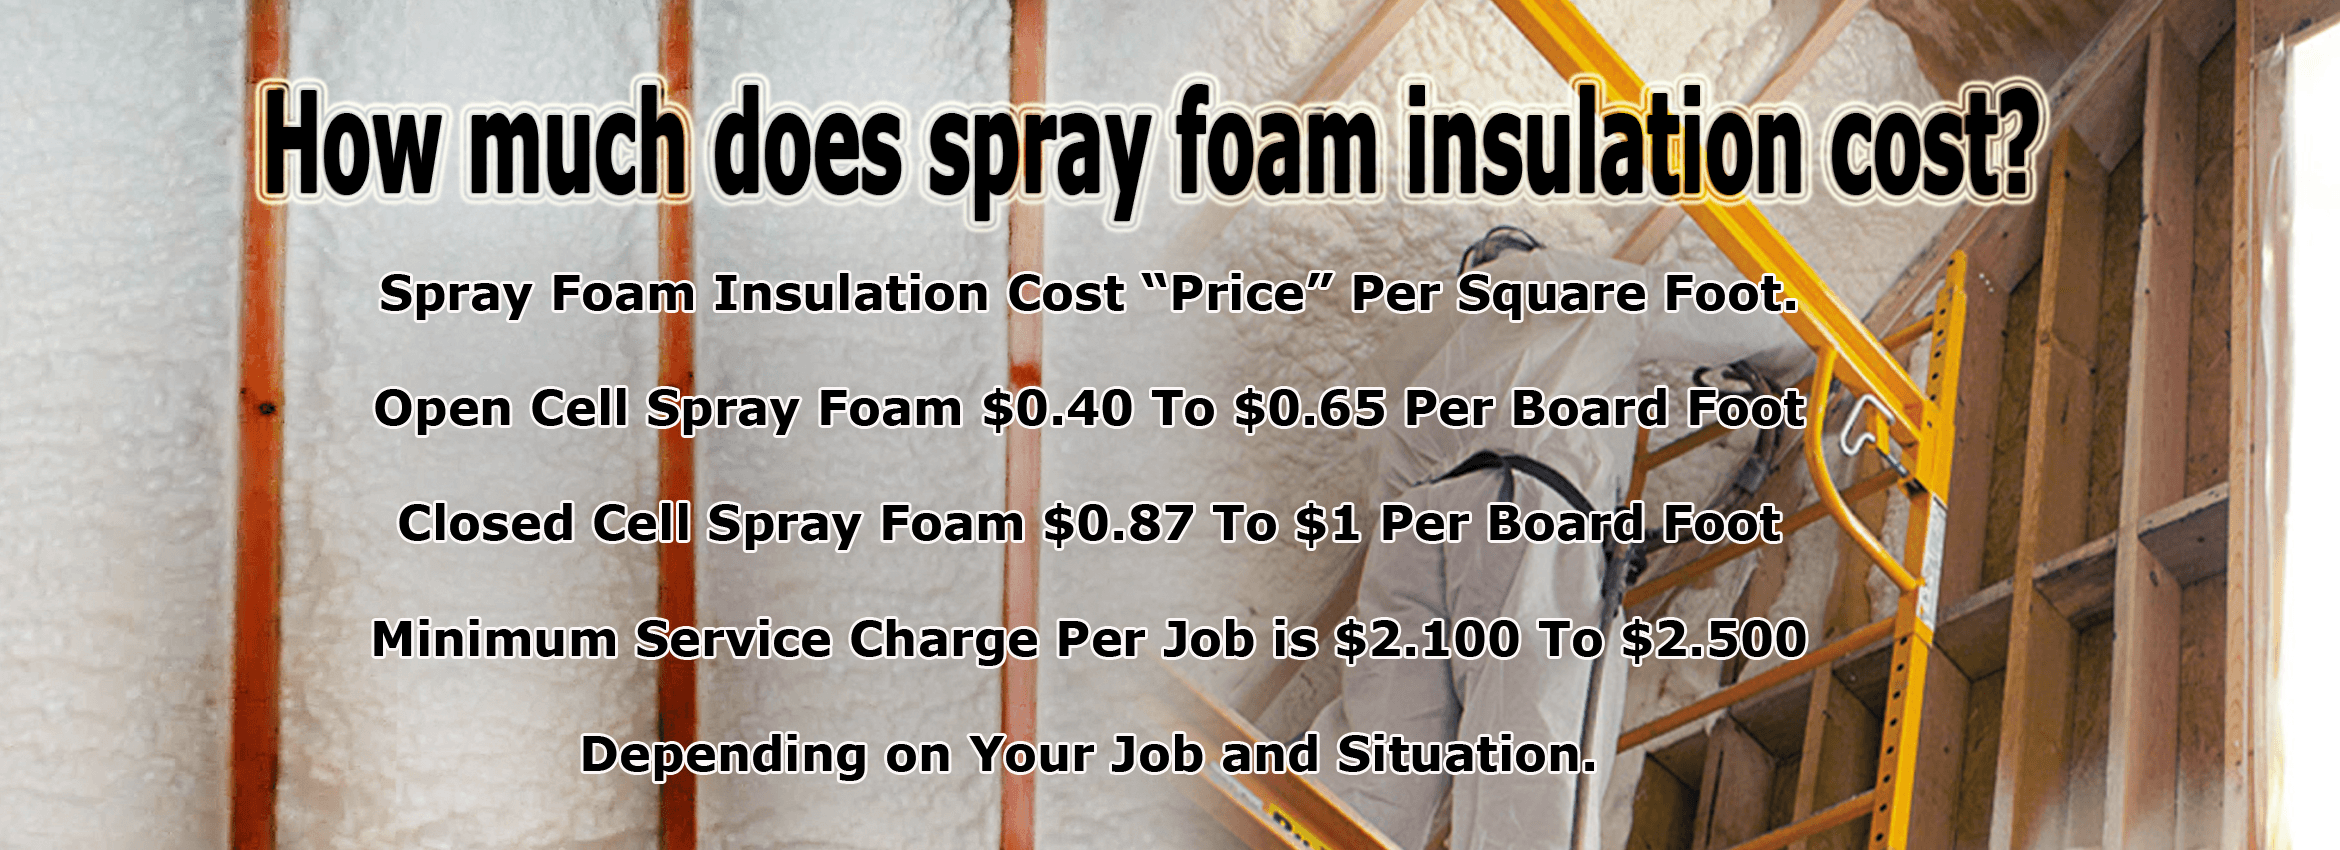 How-much-does-spray-foam-insulation-cost How much does spray foam insulation cost? Square foot - NY-NJ